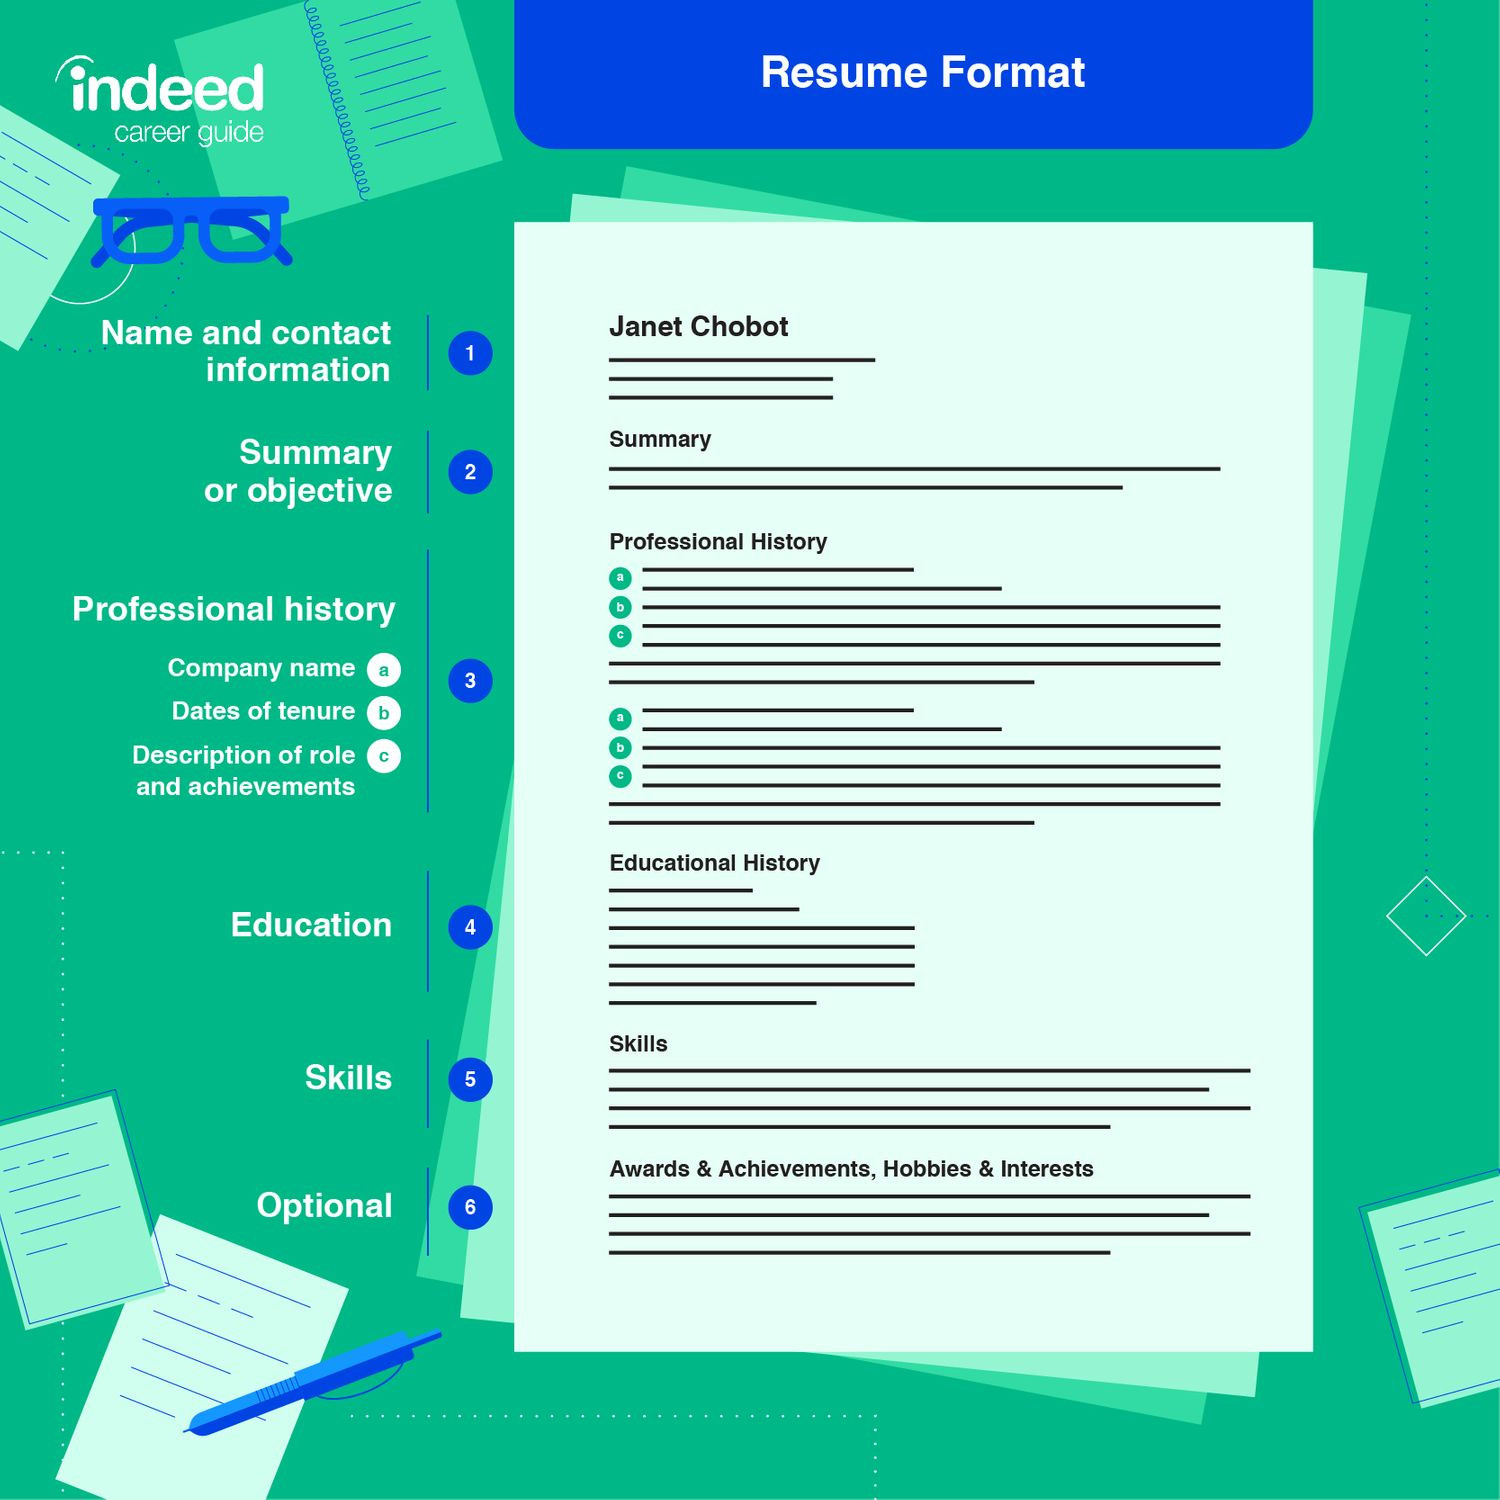 words to avoid and include on a resume